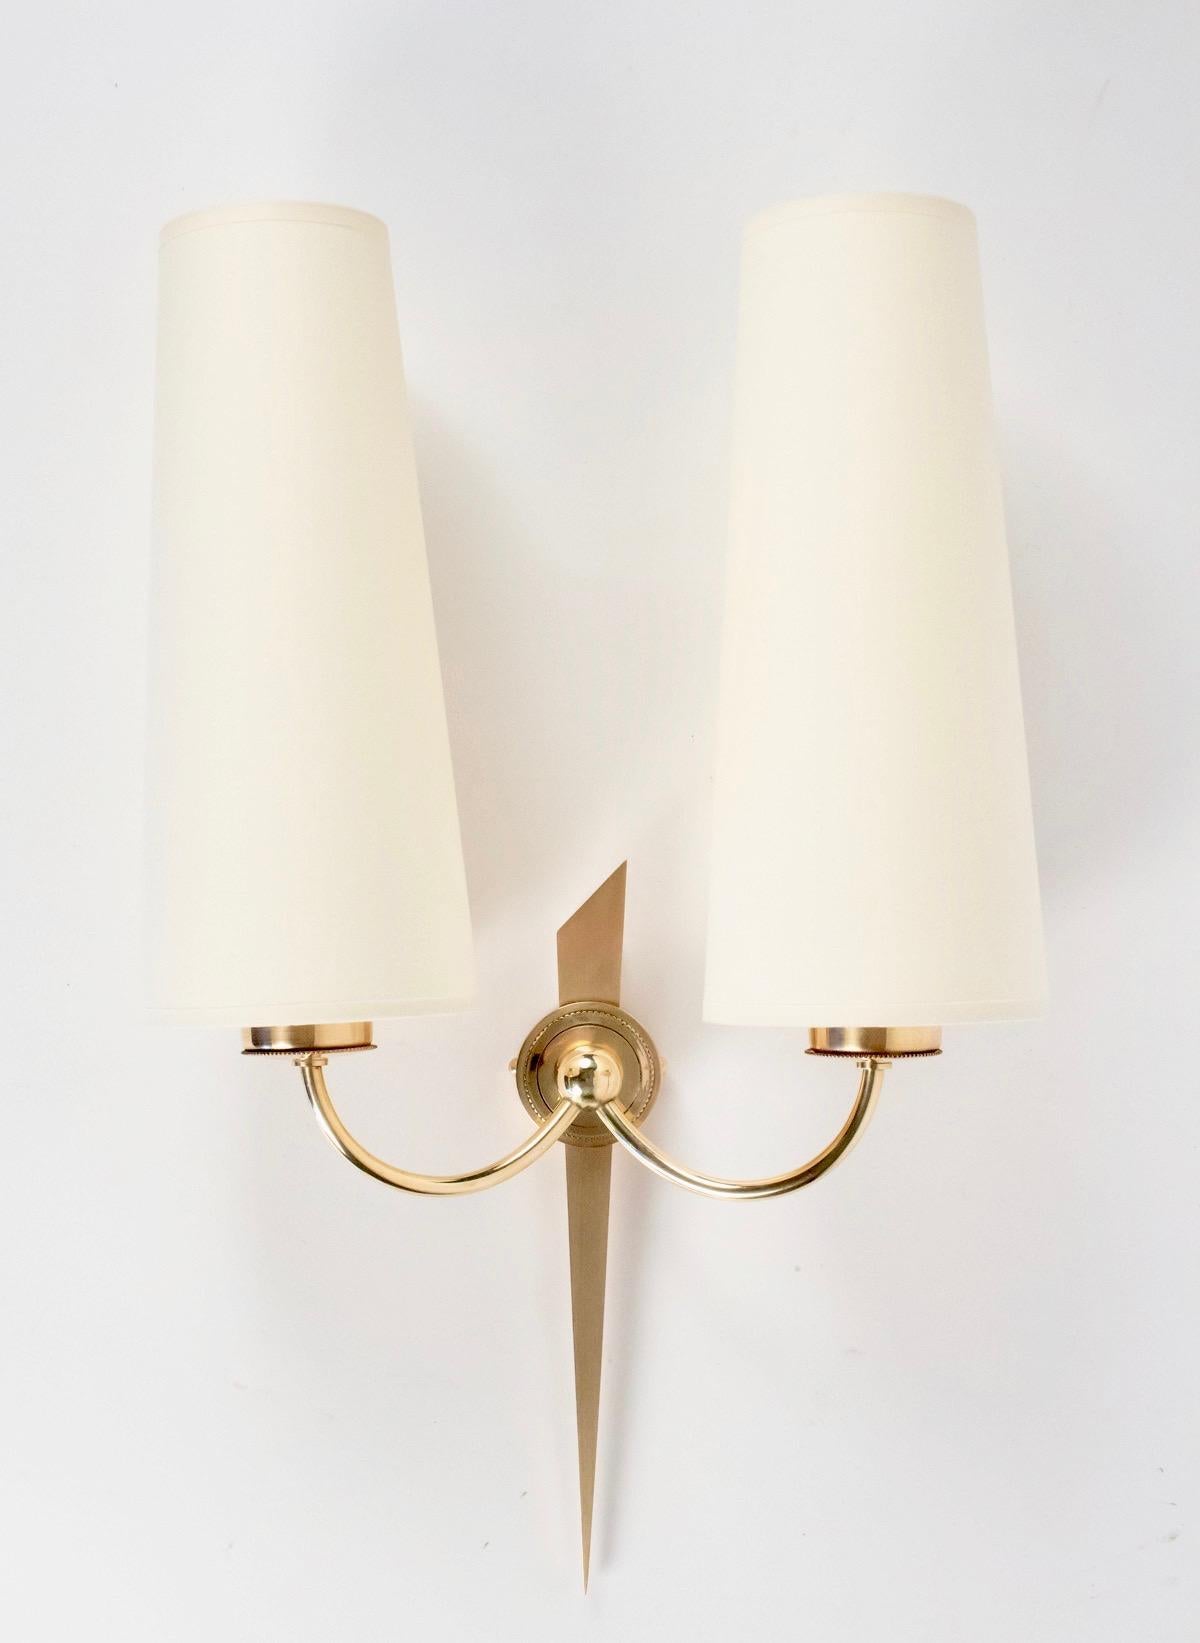 Elegant series of 4 wall lights from Maison Arlus in bronze and gilded brass.
Composed of an arm representing a stylized arrow made of a bronze coin.
The two light curved arms in gilded brass meet at the level of the central rod and are attached to